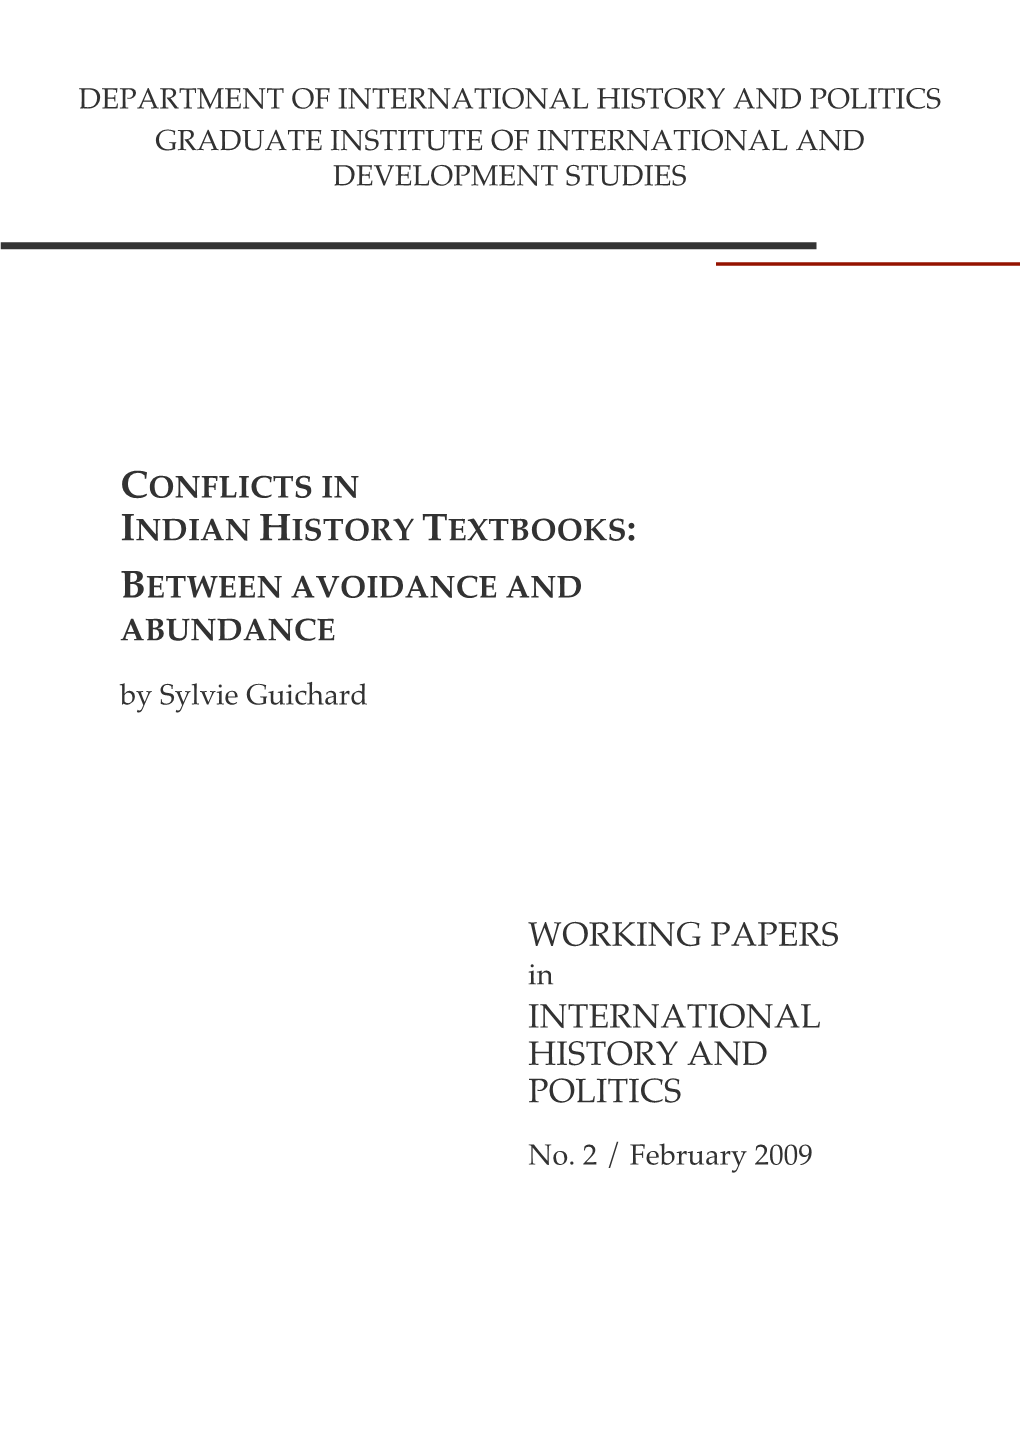 Working Papers International History and Politics